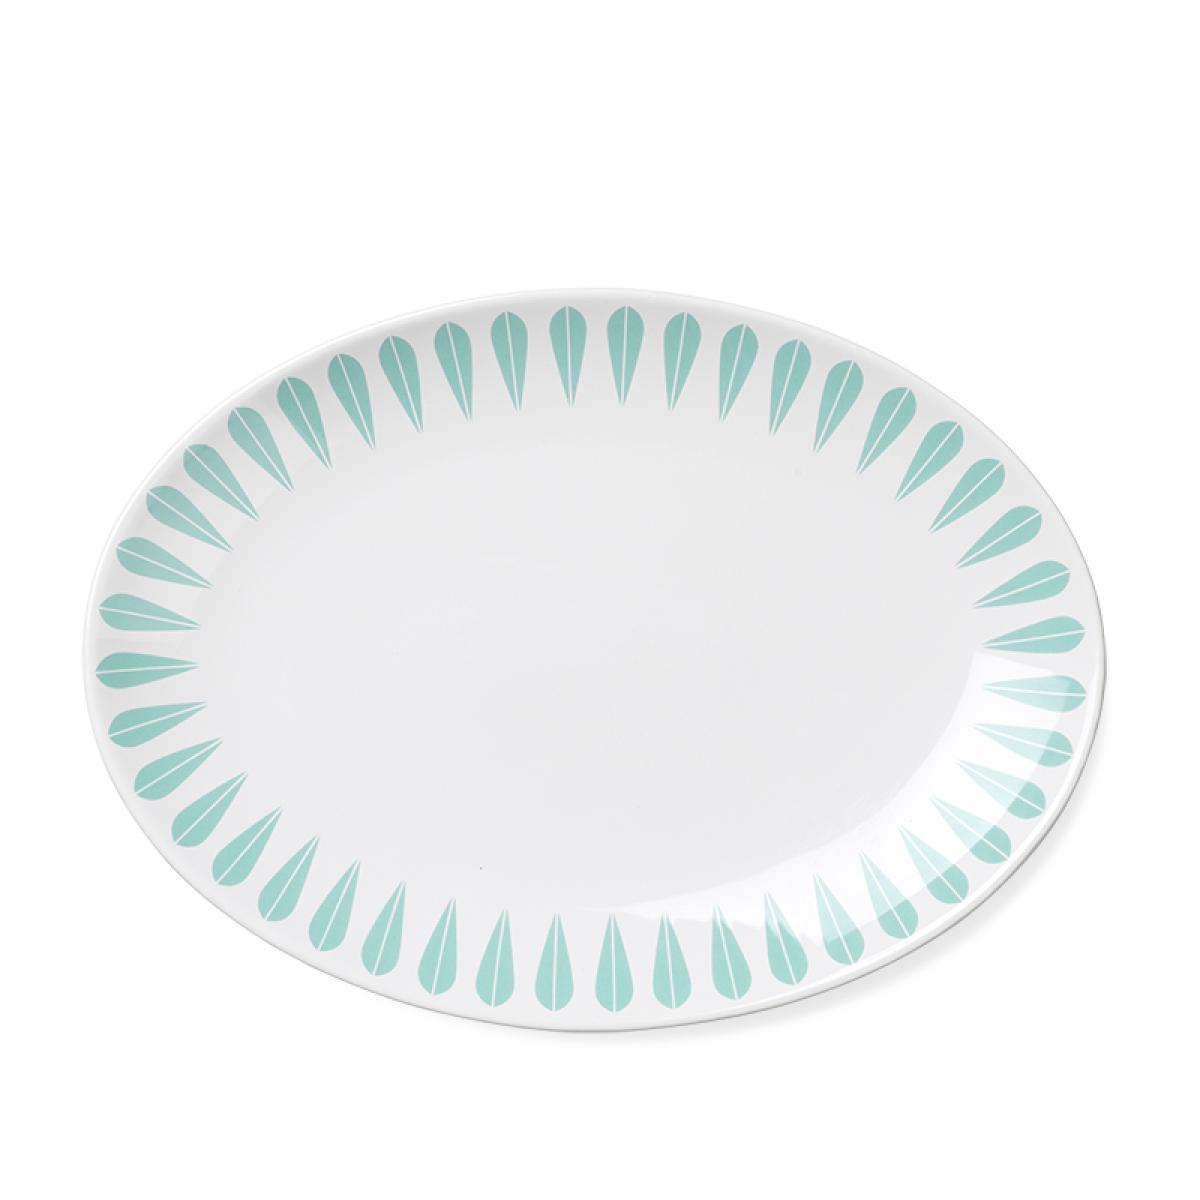 Lucie Kaas Collection Arne Clausen Service Plate Mint Green, 34 cm